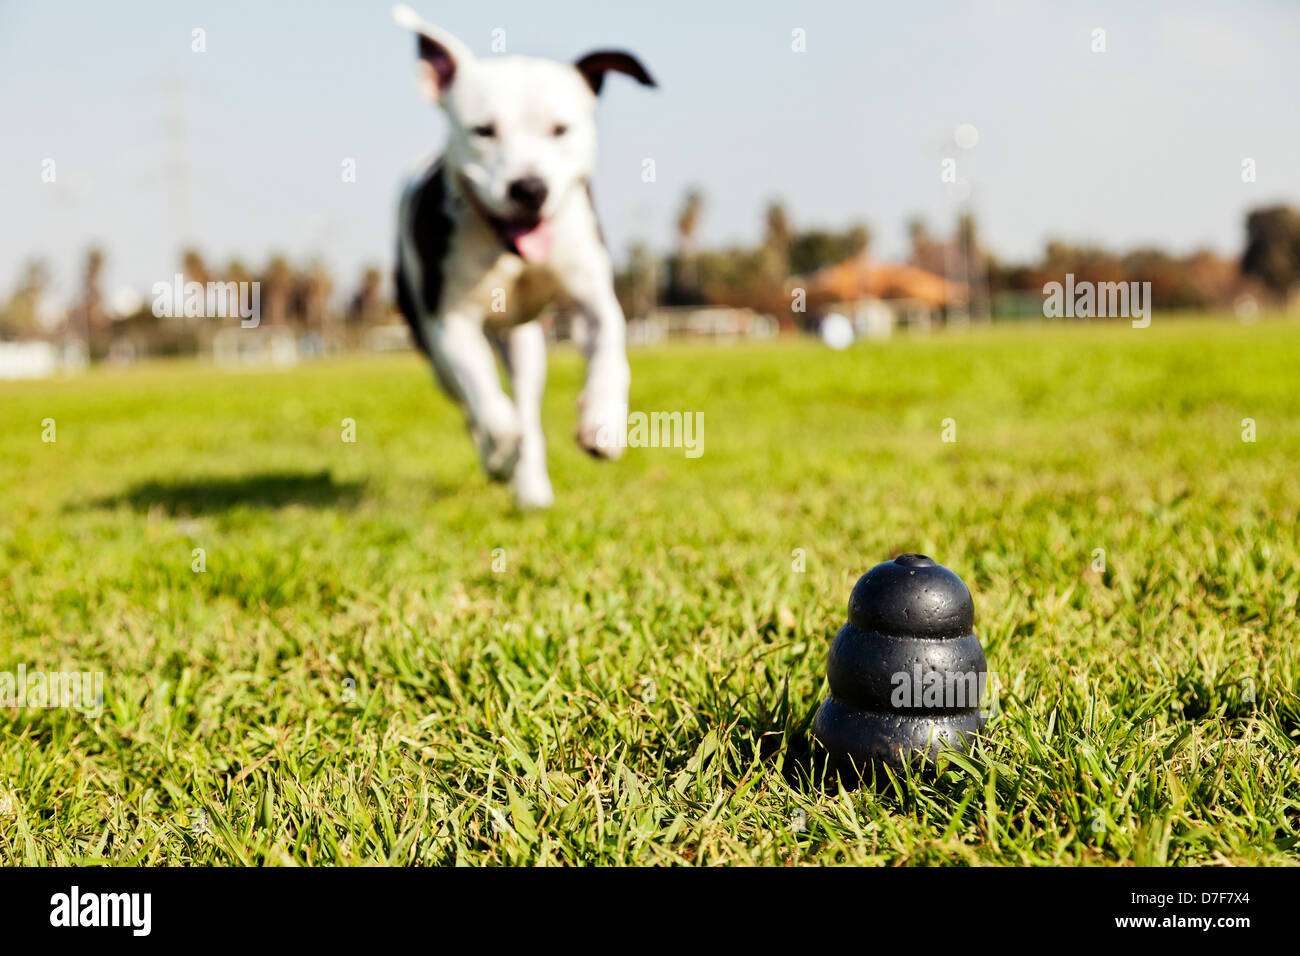 A black dog toy at the front of the frame, with a blurred Pitbull running towards it from the distance. Stock Photo